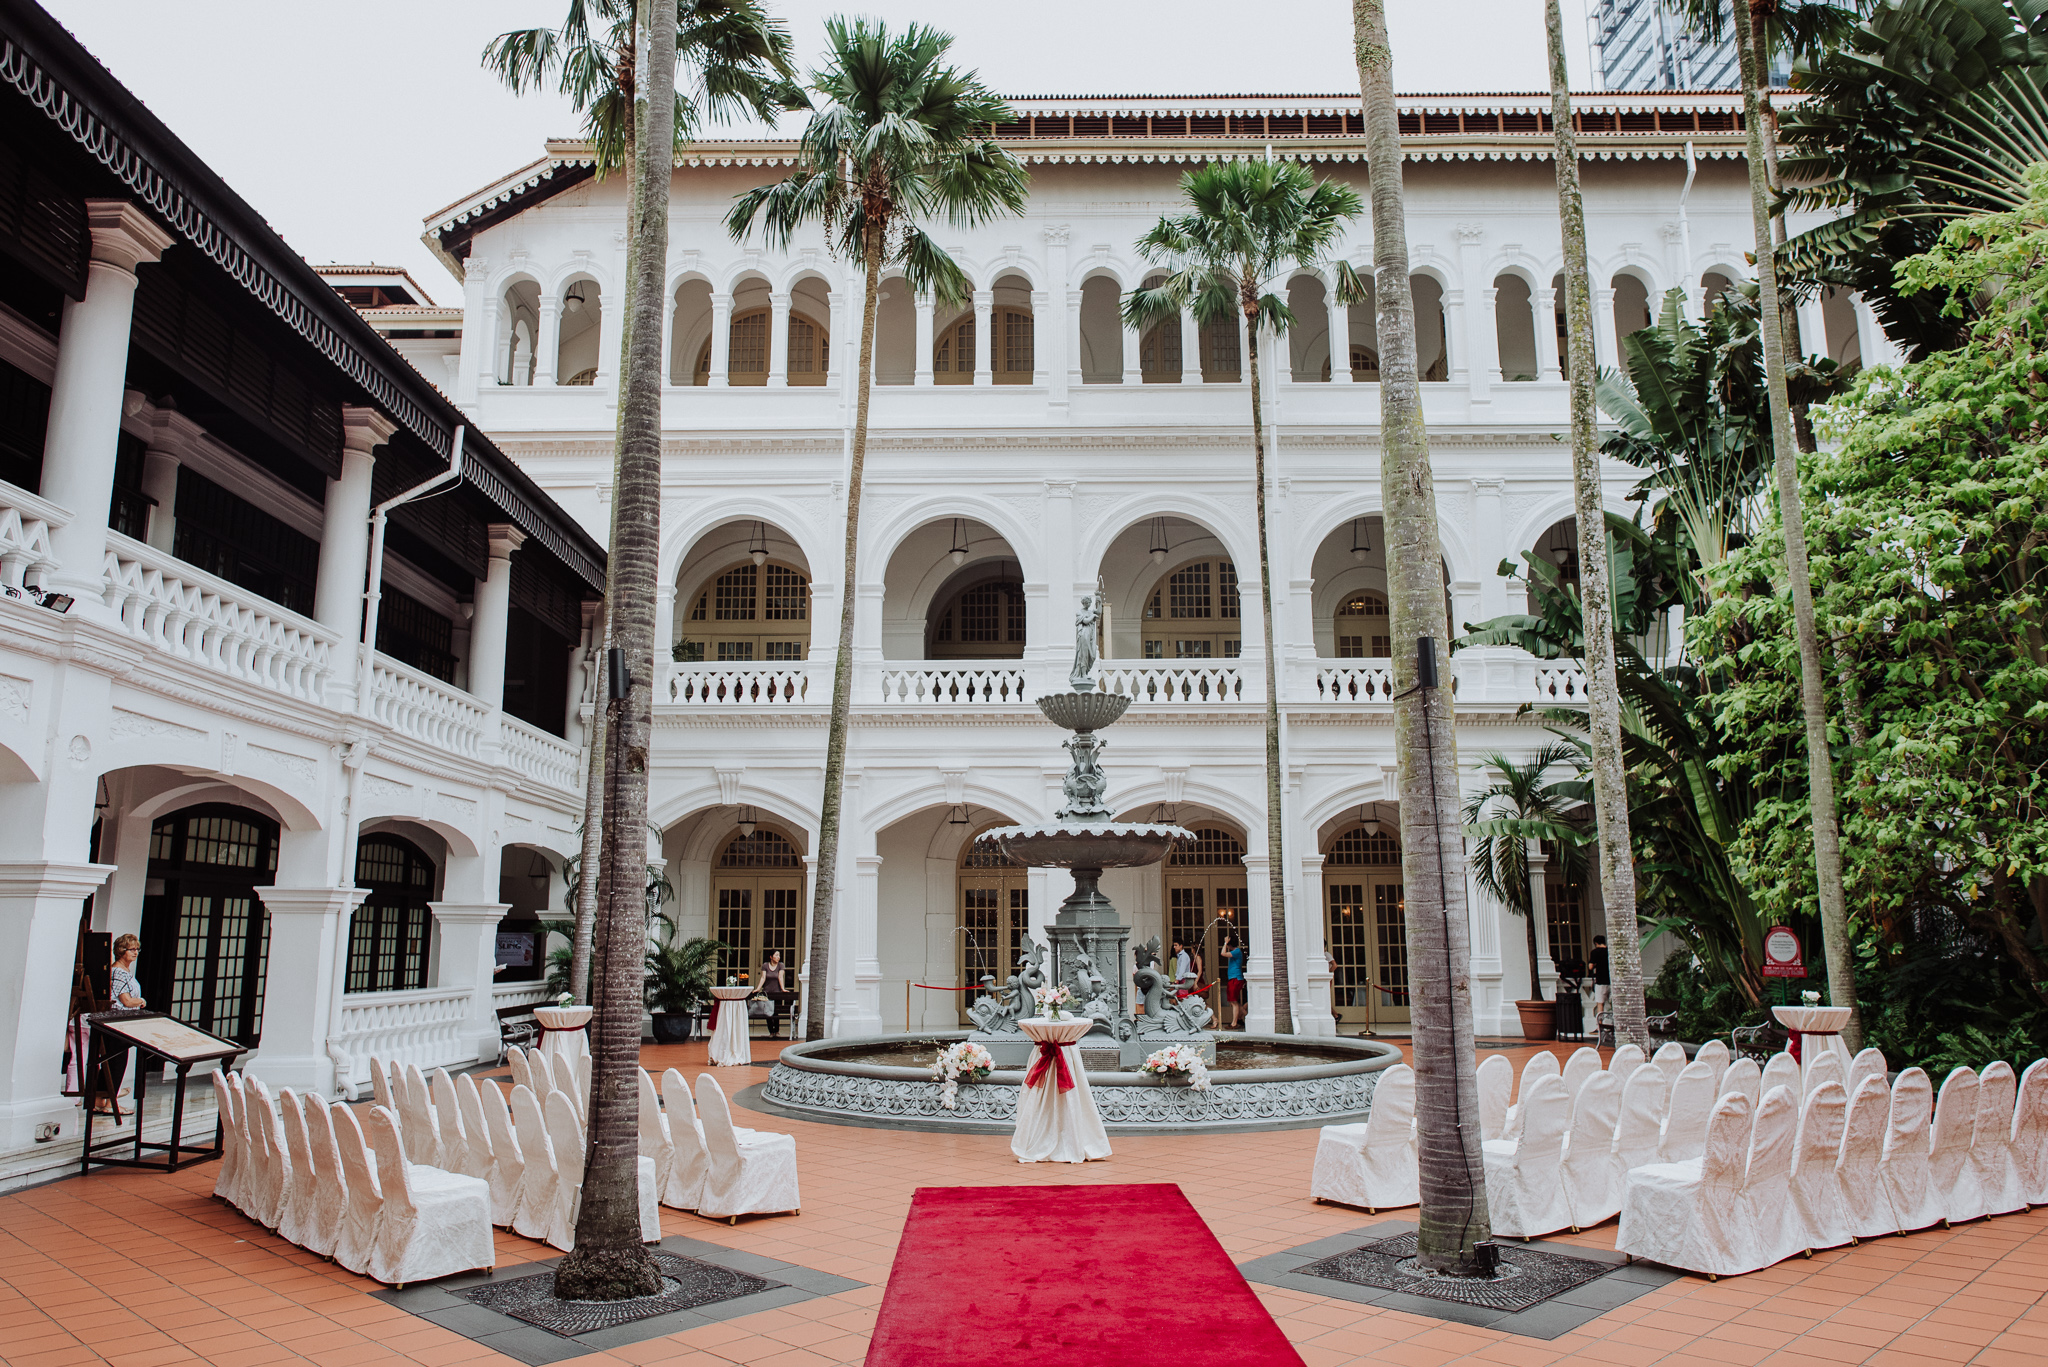 New wedding venues to explore in Singapore – Hotels edition | Chere